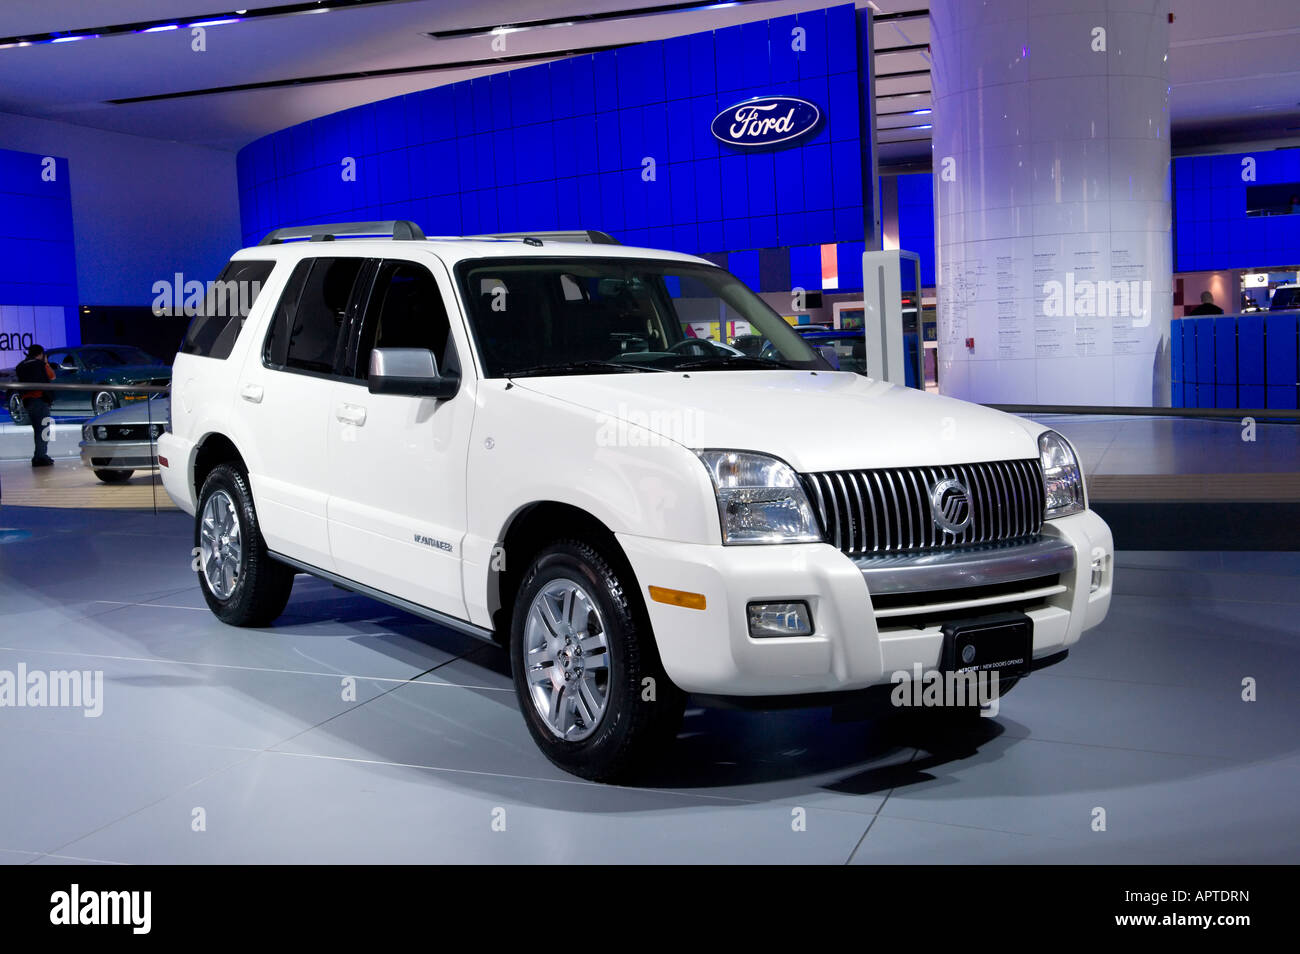 2008 Mercury Mountaineer at the 2008 North American International Auto Show in Detroit Michigan USA Stock Photo